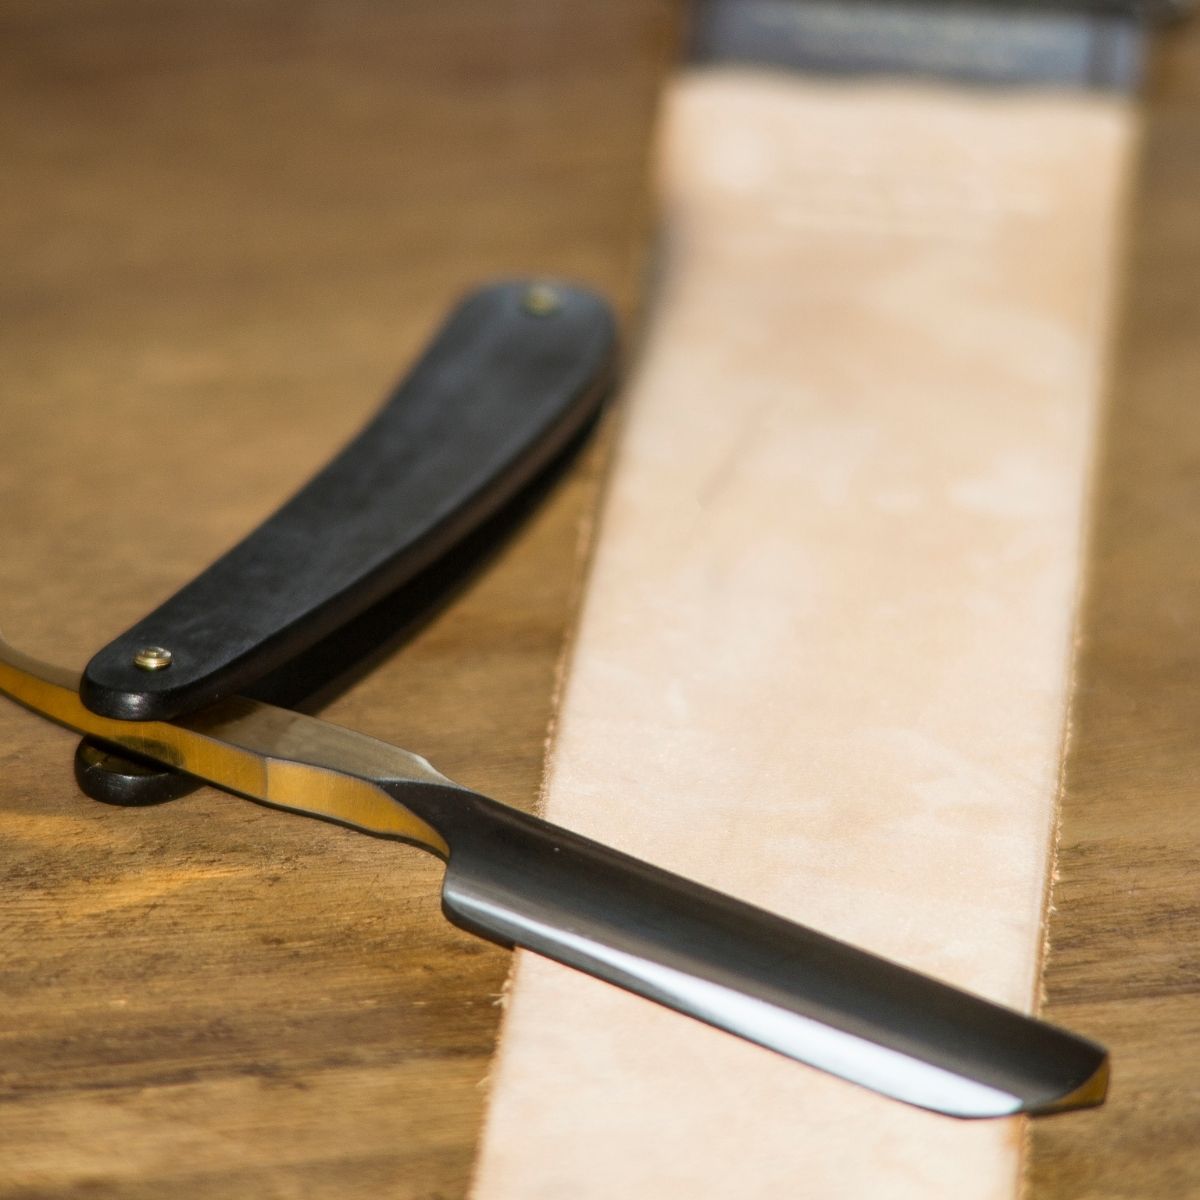 A straight razor getting sharpened with a strop